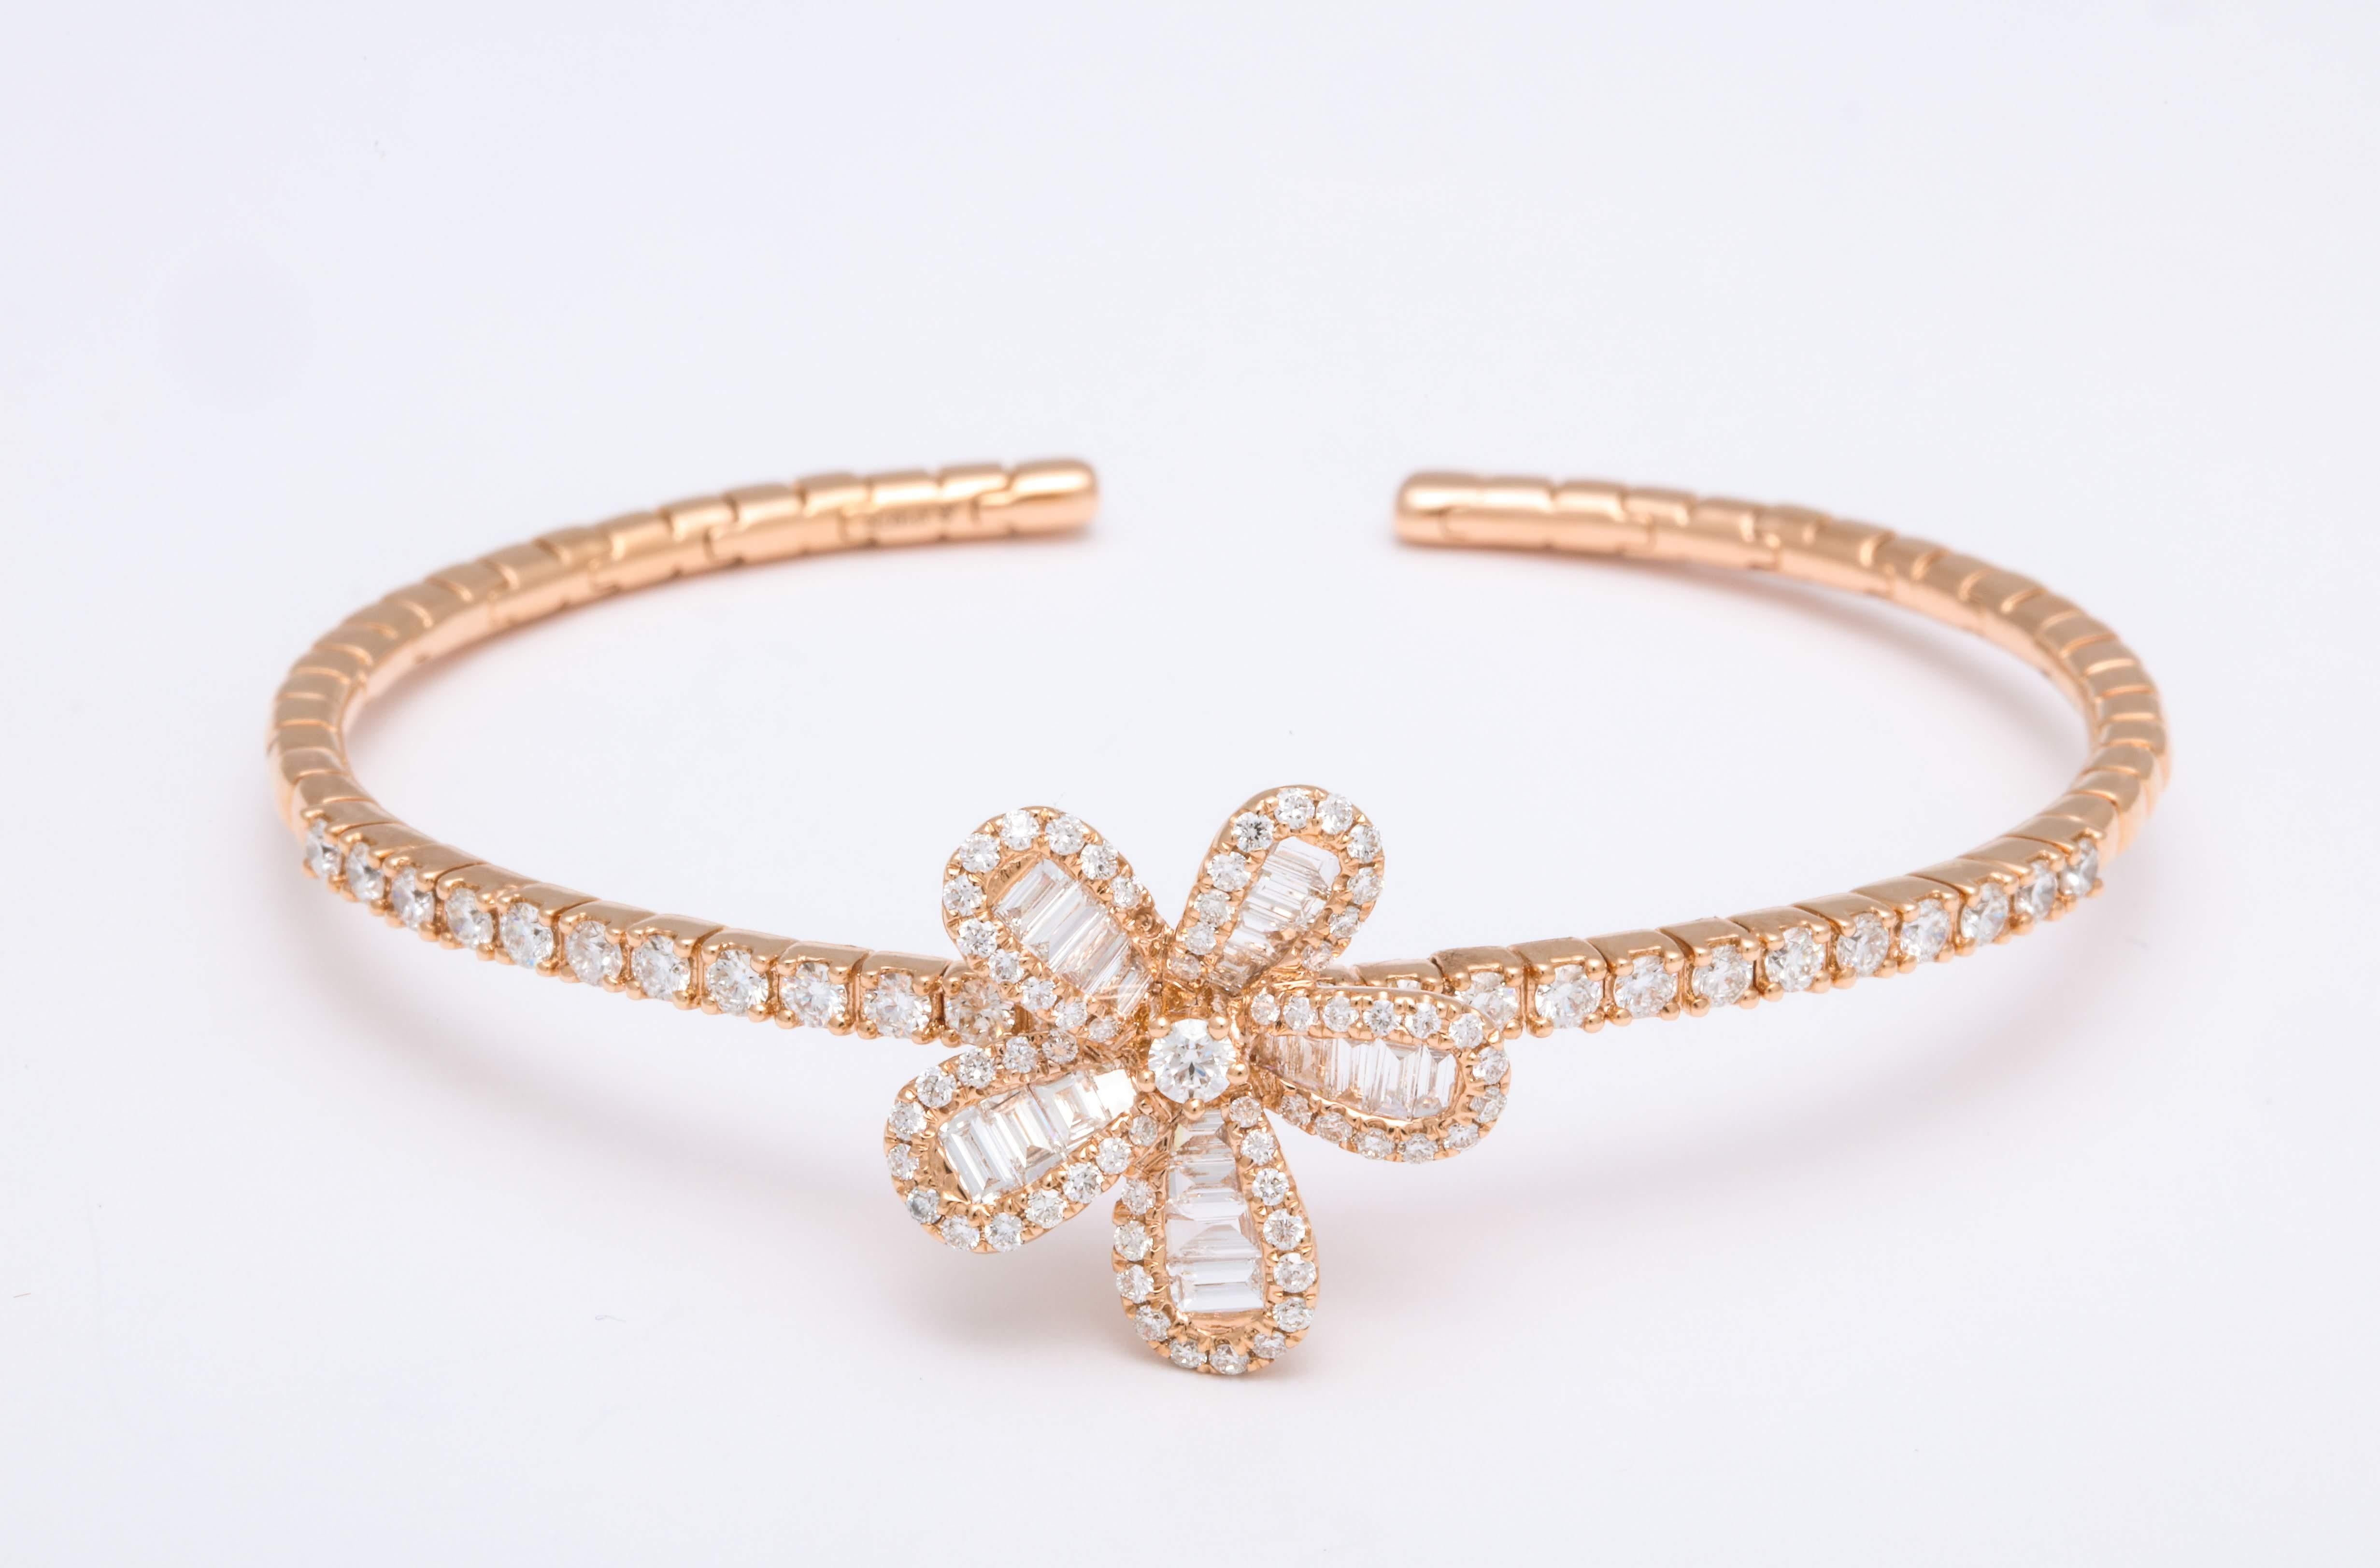 Romantically chic 5-petal floral stationary charm decorated with diamond baguette and brilliant-cut diamond trim, mounted on 18 Karat rose gold clip bracelet finished with pave'-set round brilliant-cut diamonds: 2.11 carats

Dimensions: Inner